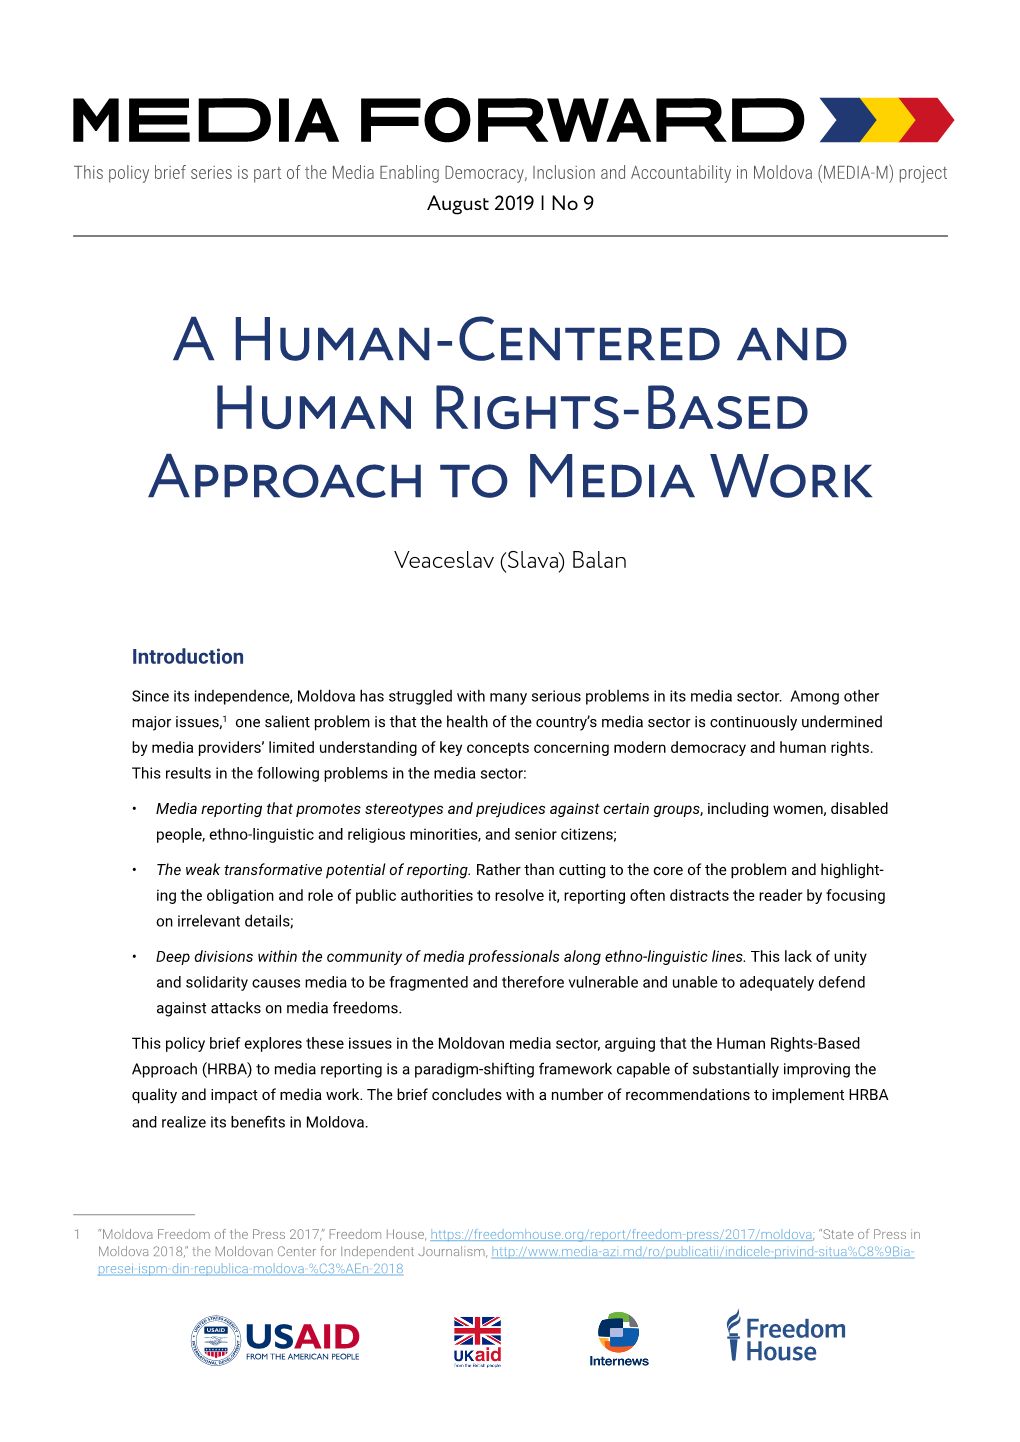 A Human-Centered and Human Rights-Based Approach to Media Work